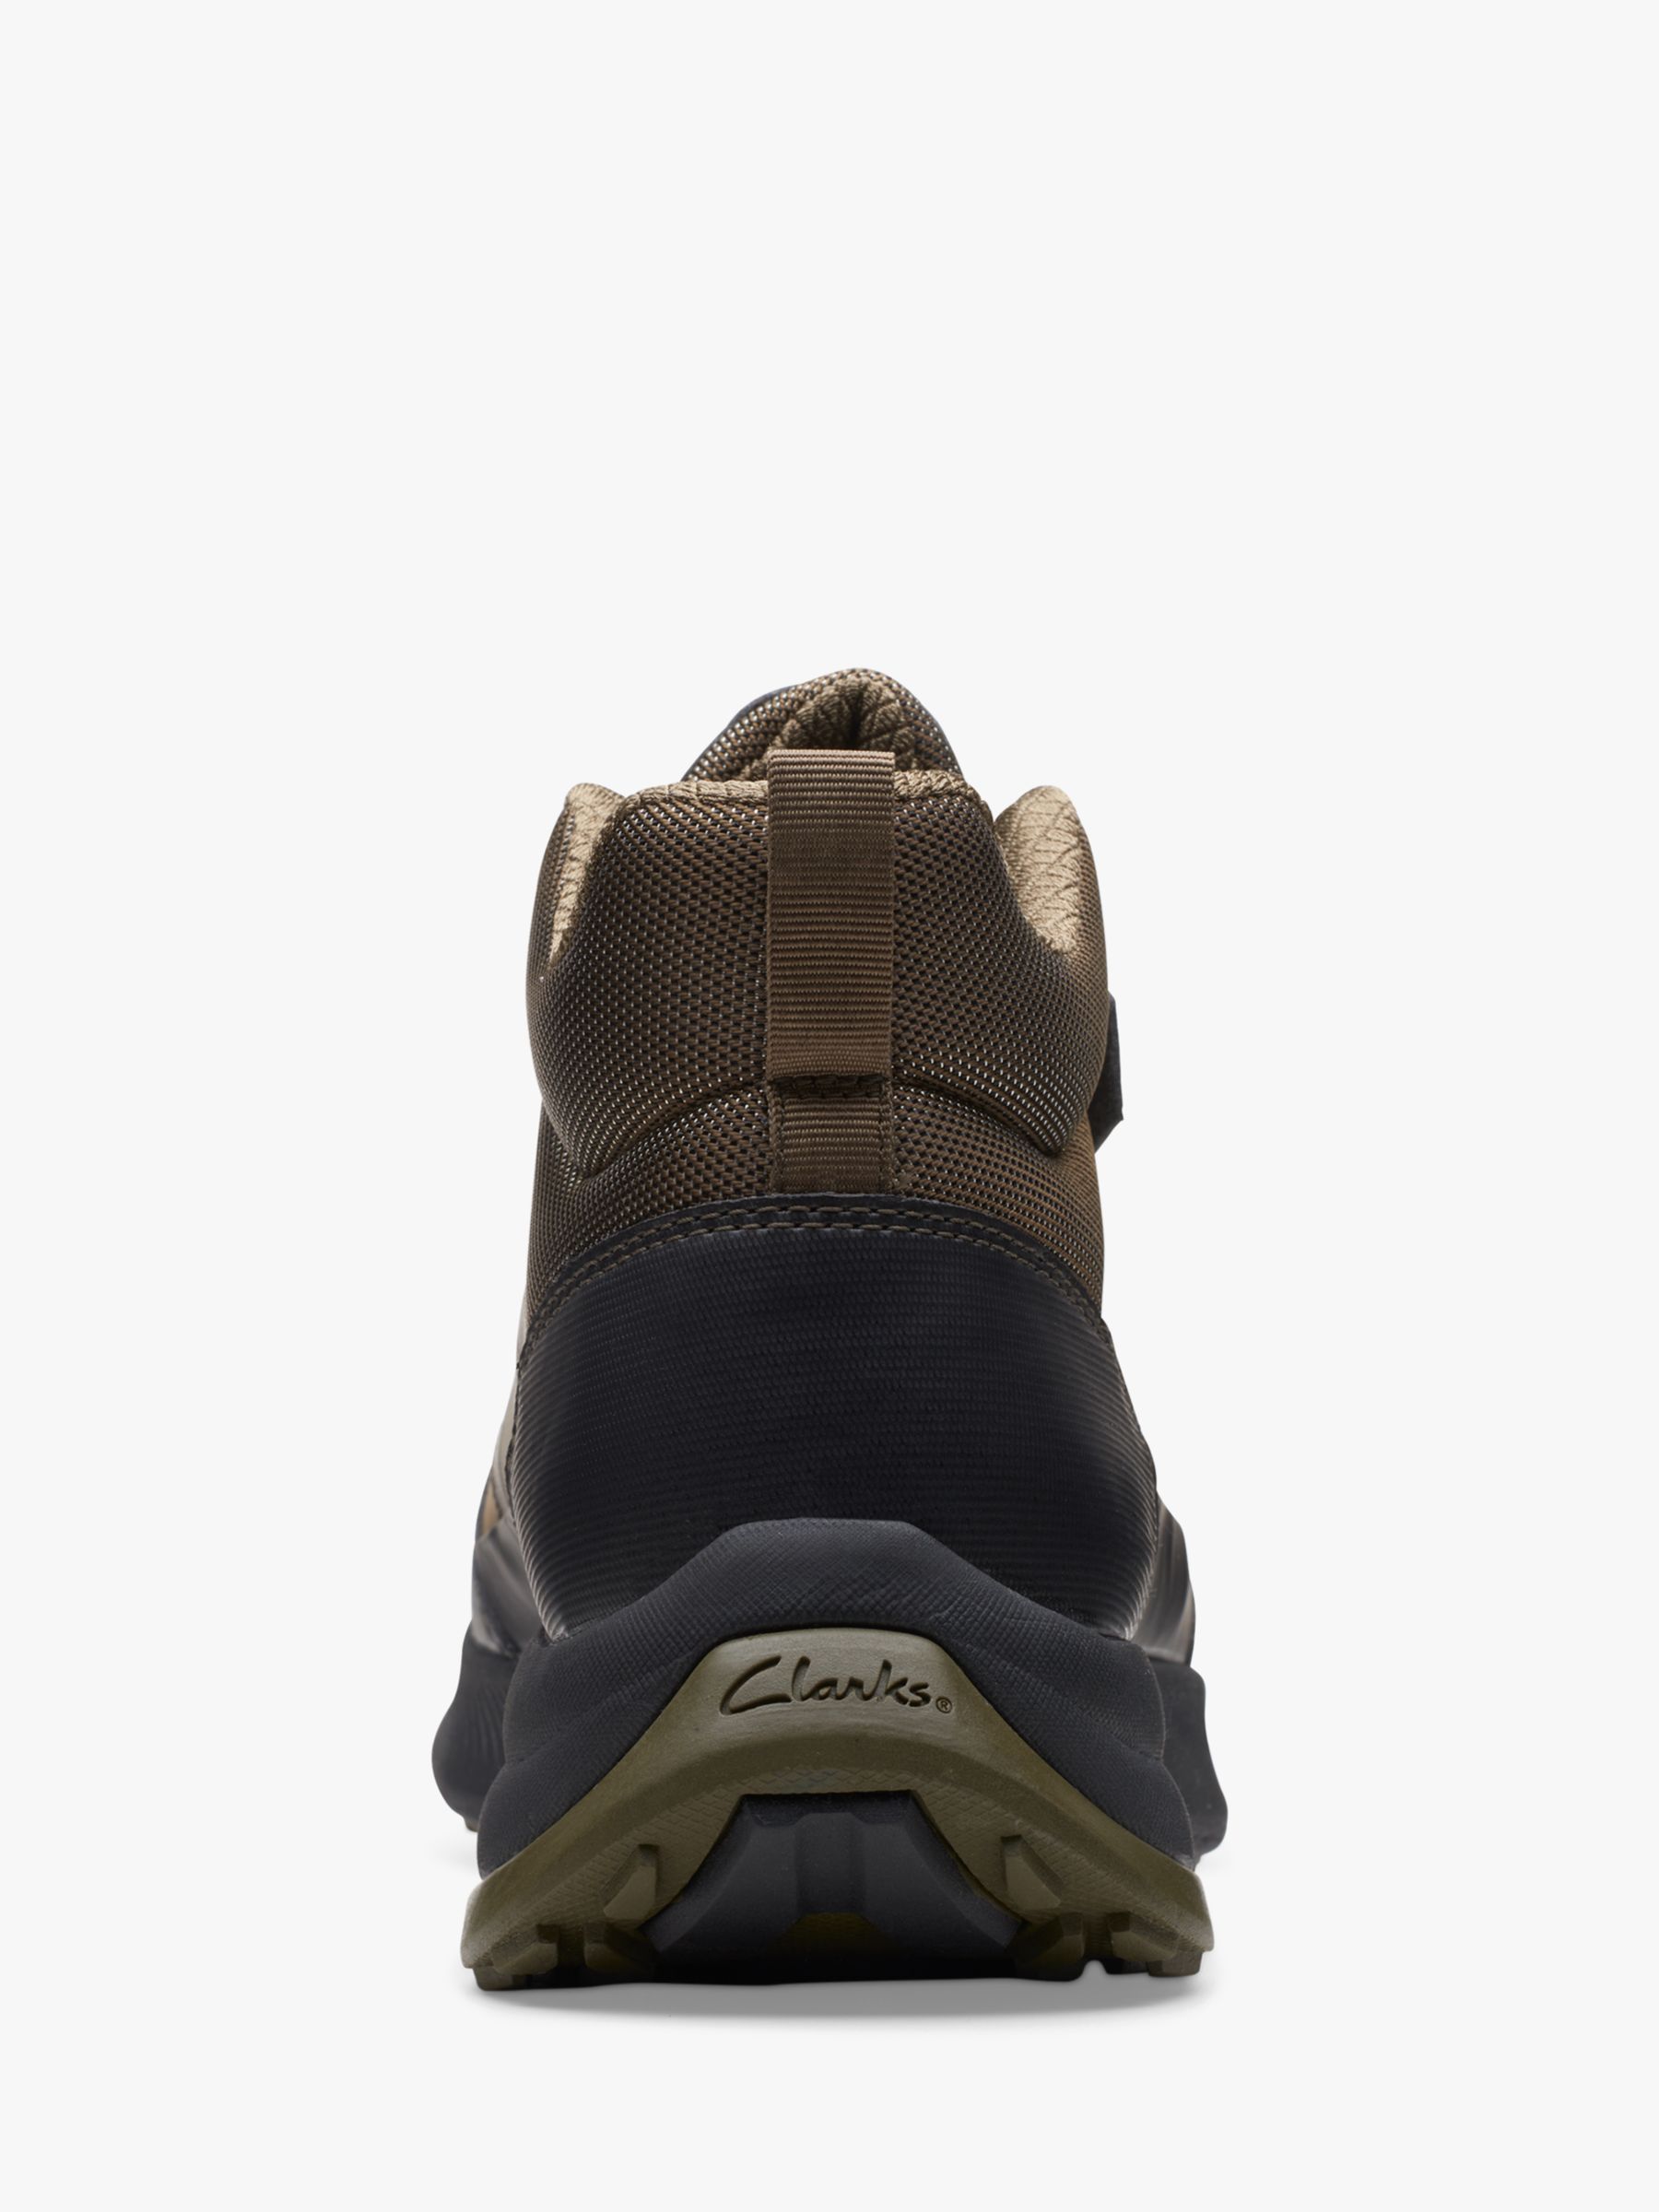 Clarks All Terrain Leisure Trail Boot at John Lewis & Partners